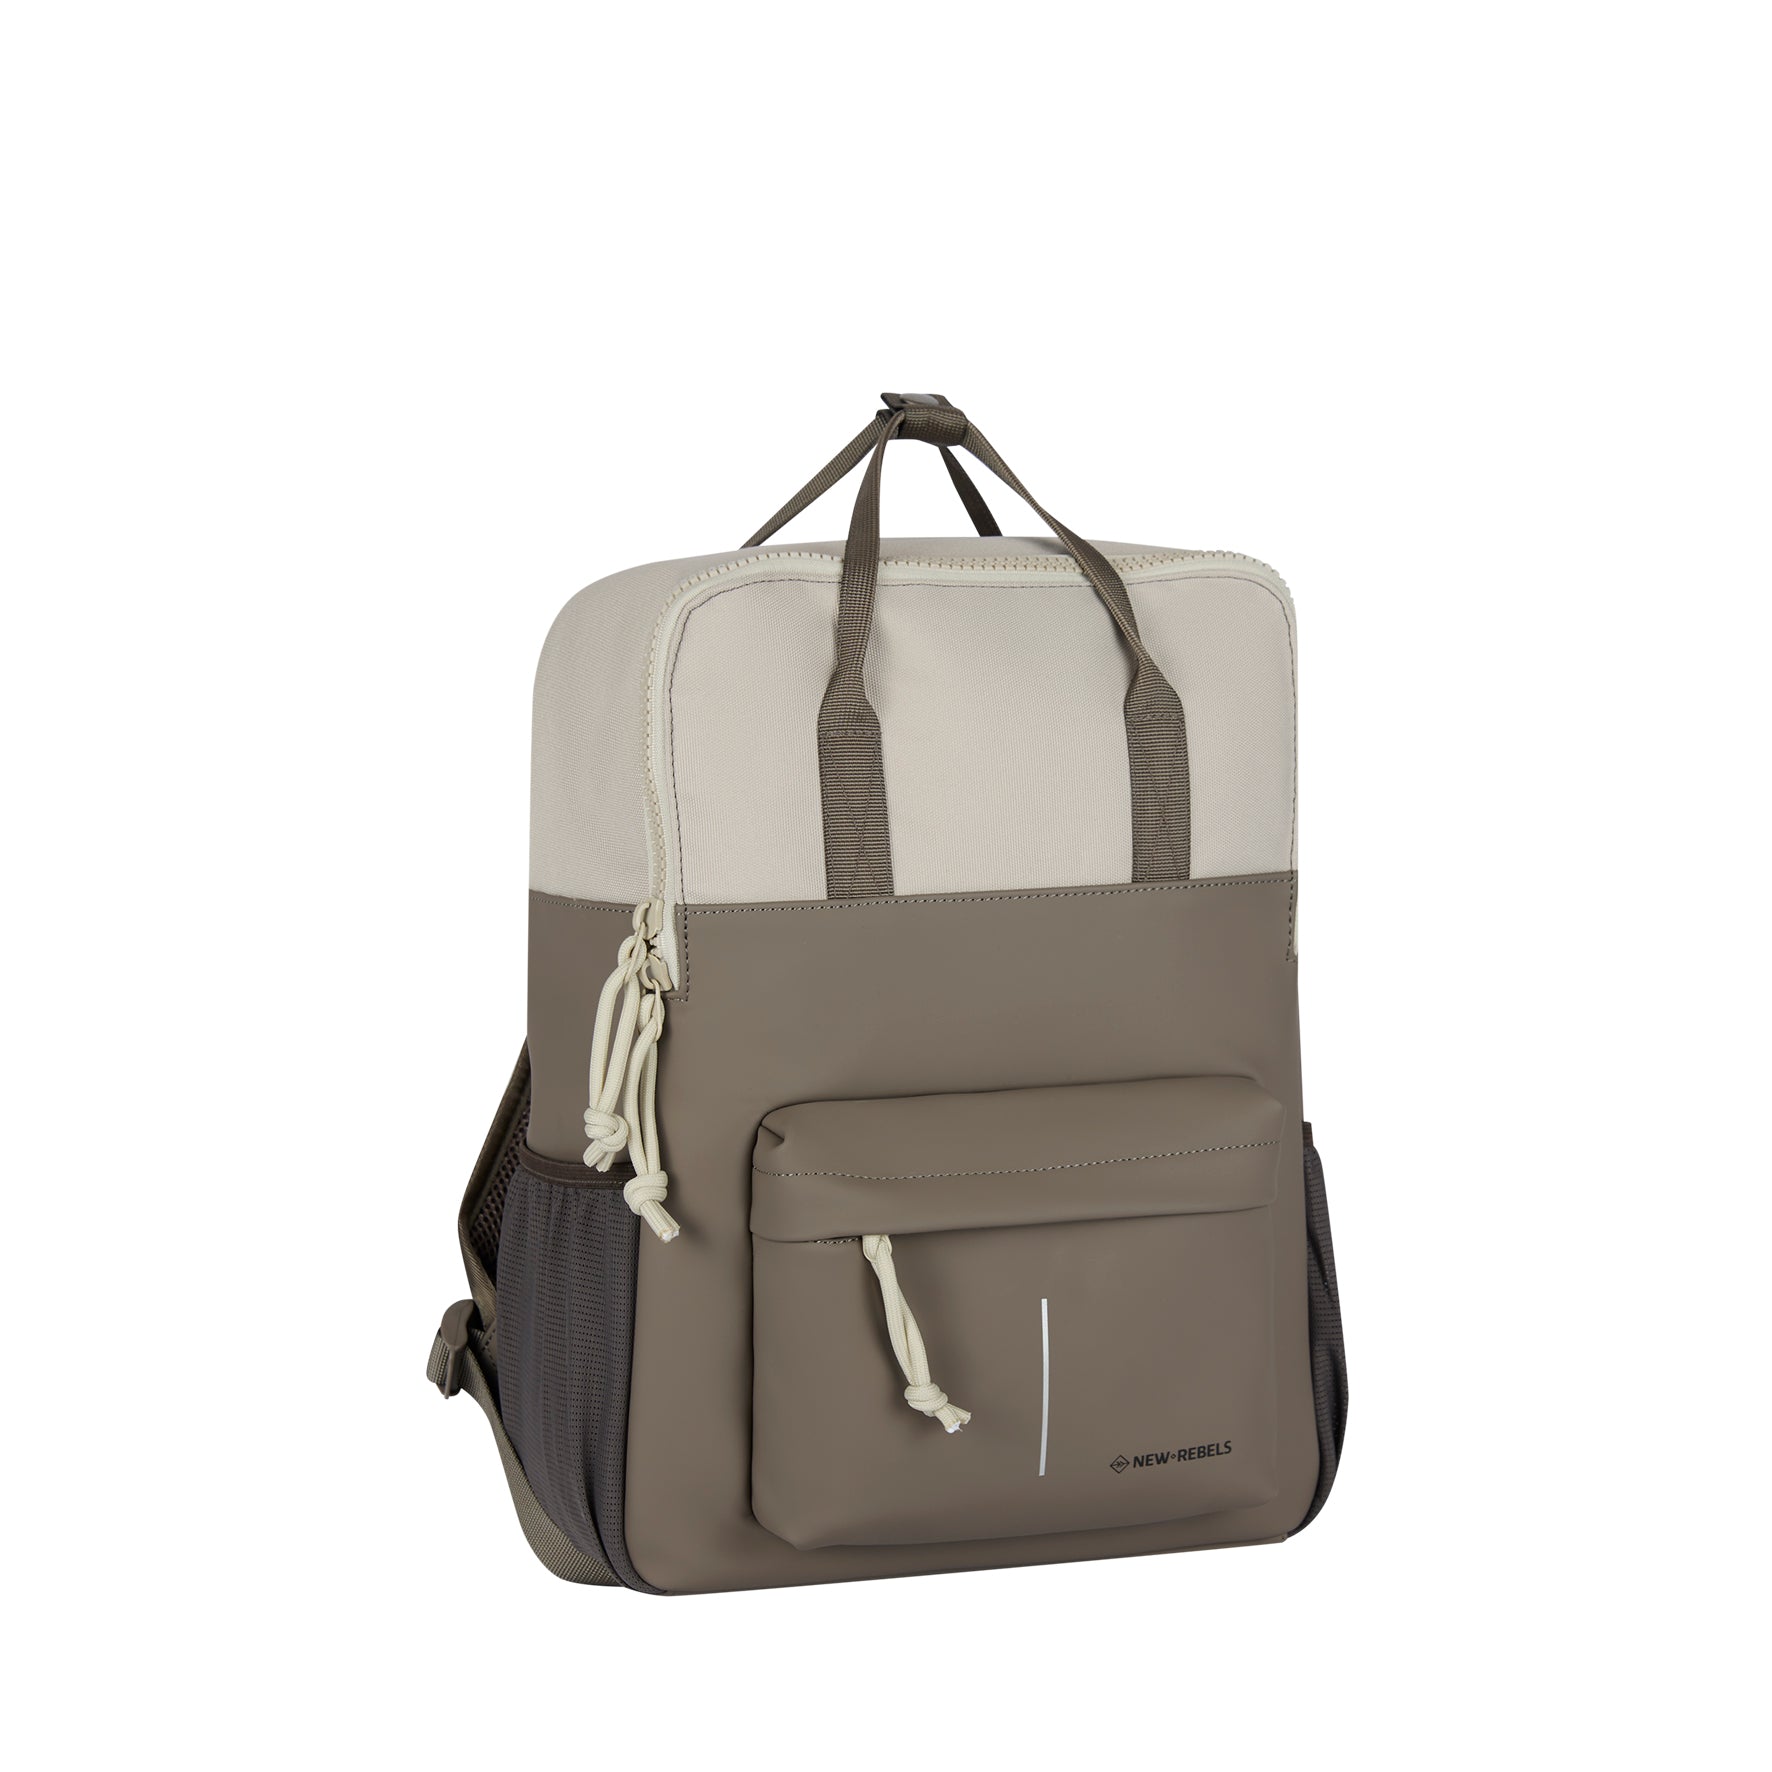 Backpack 'Springfield' taupe/beige